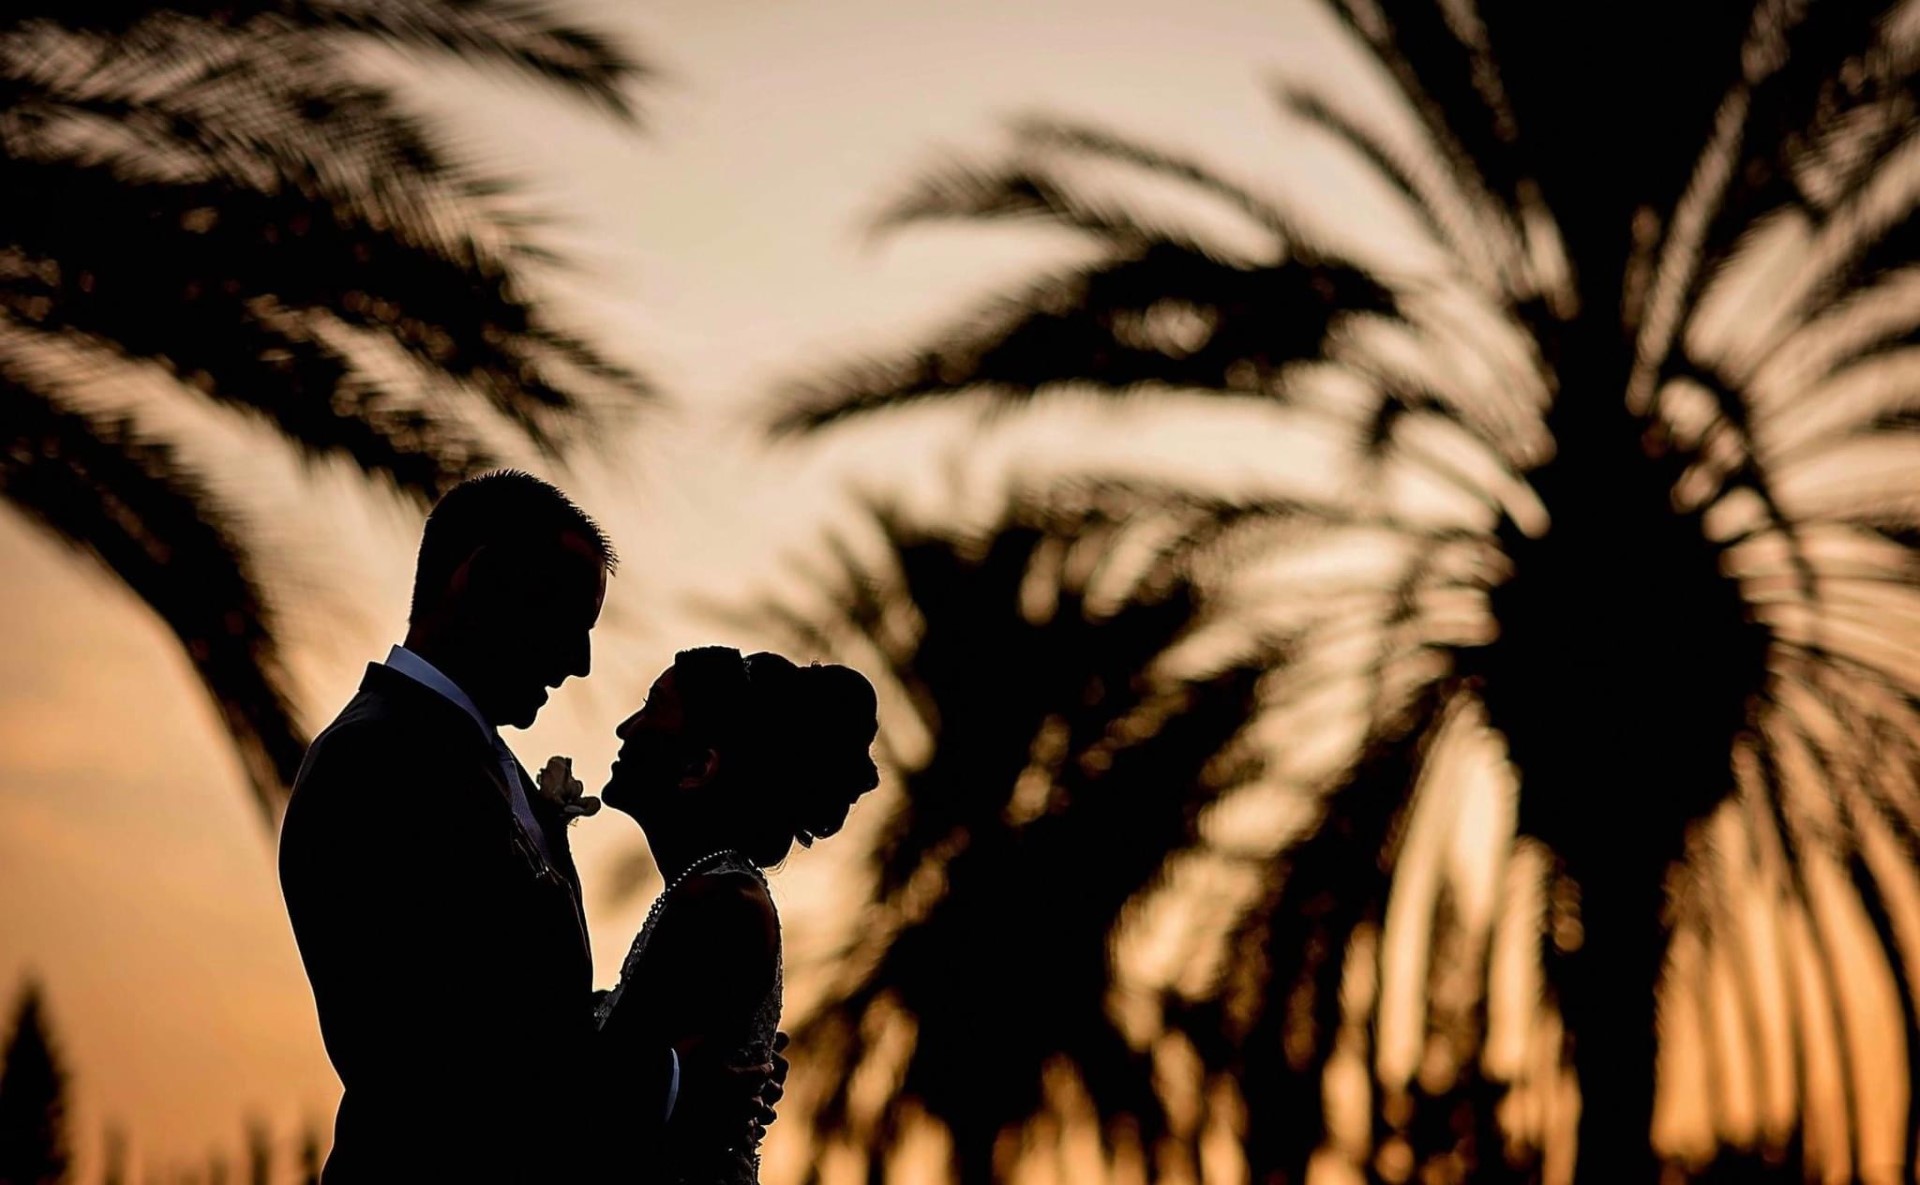 Vendor Showcase of The Freckled Photographer. Silhouette of bride and groom